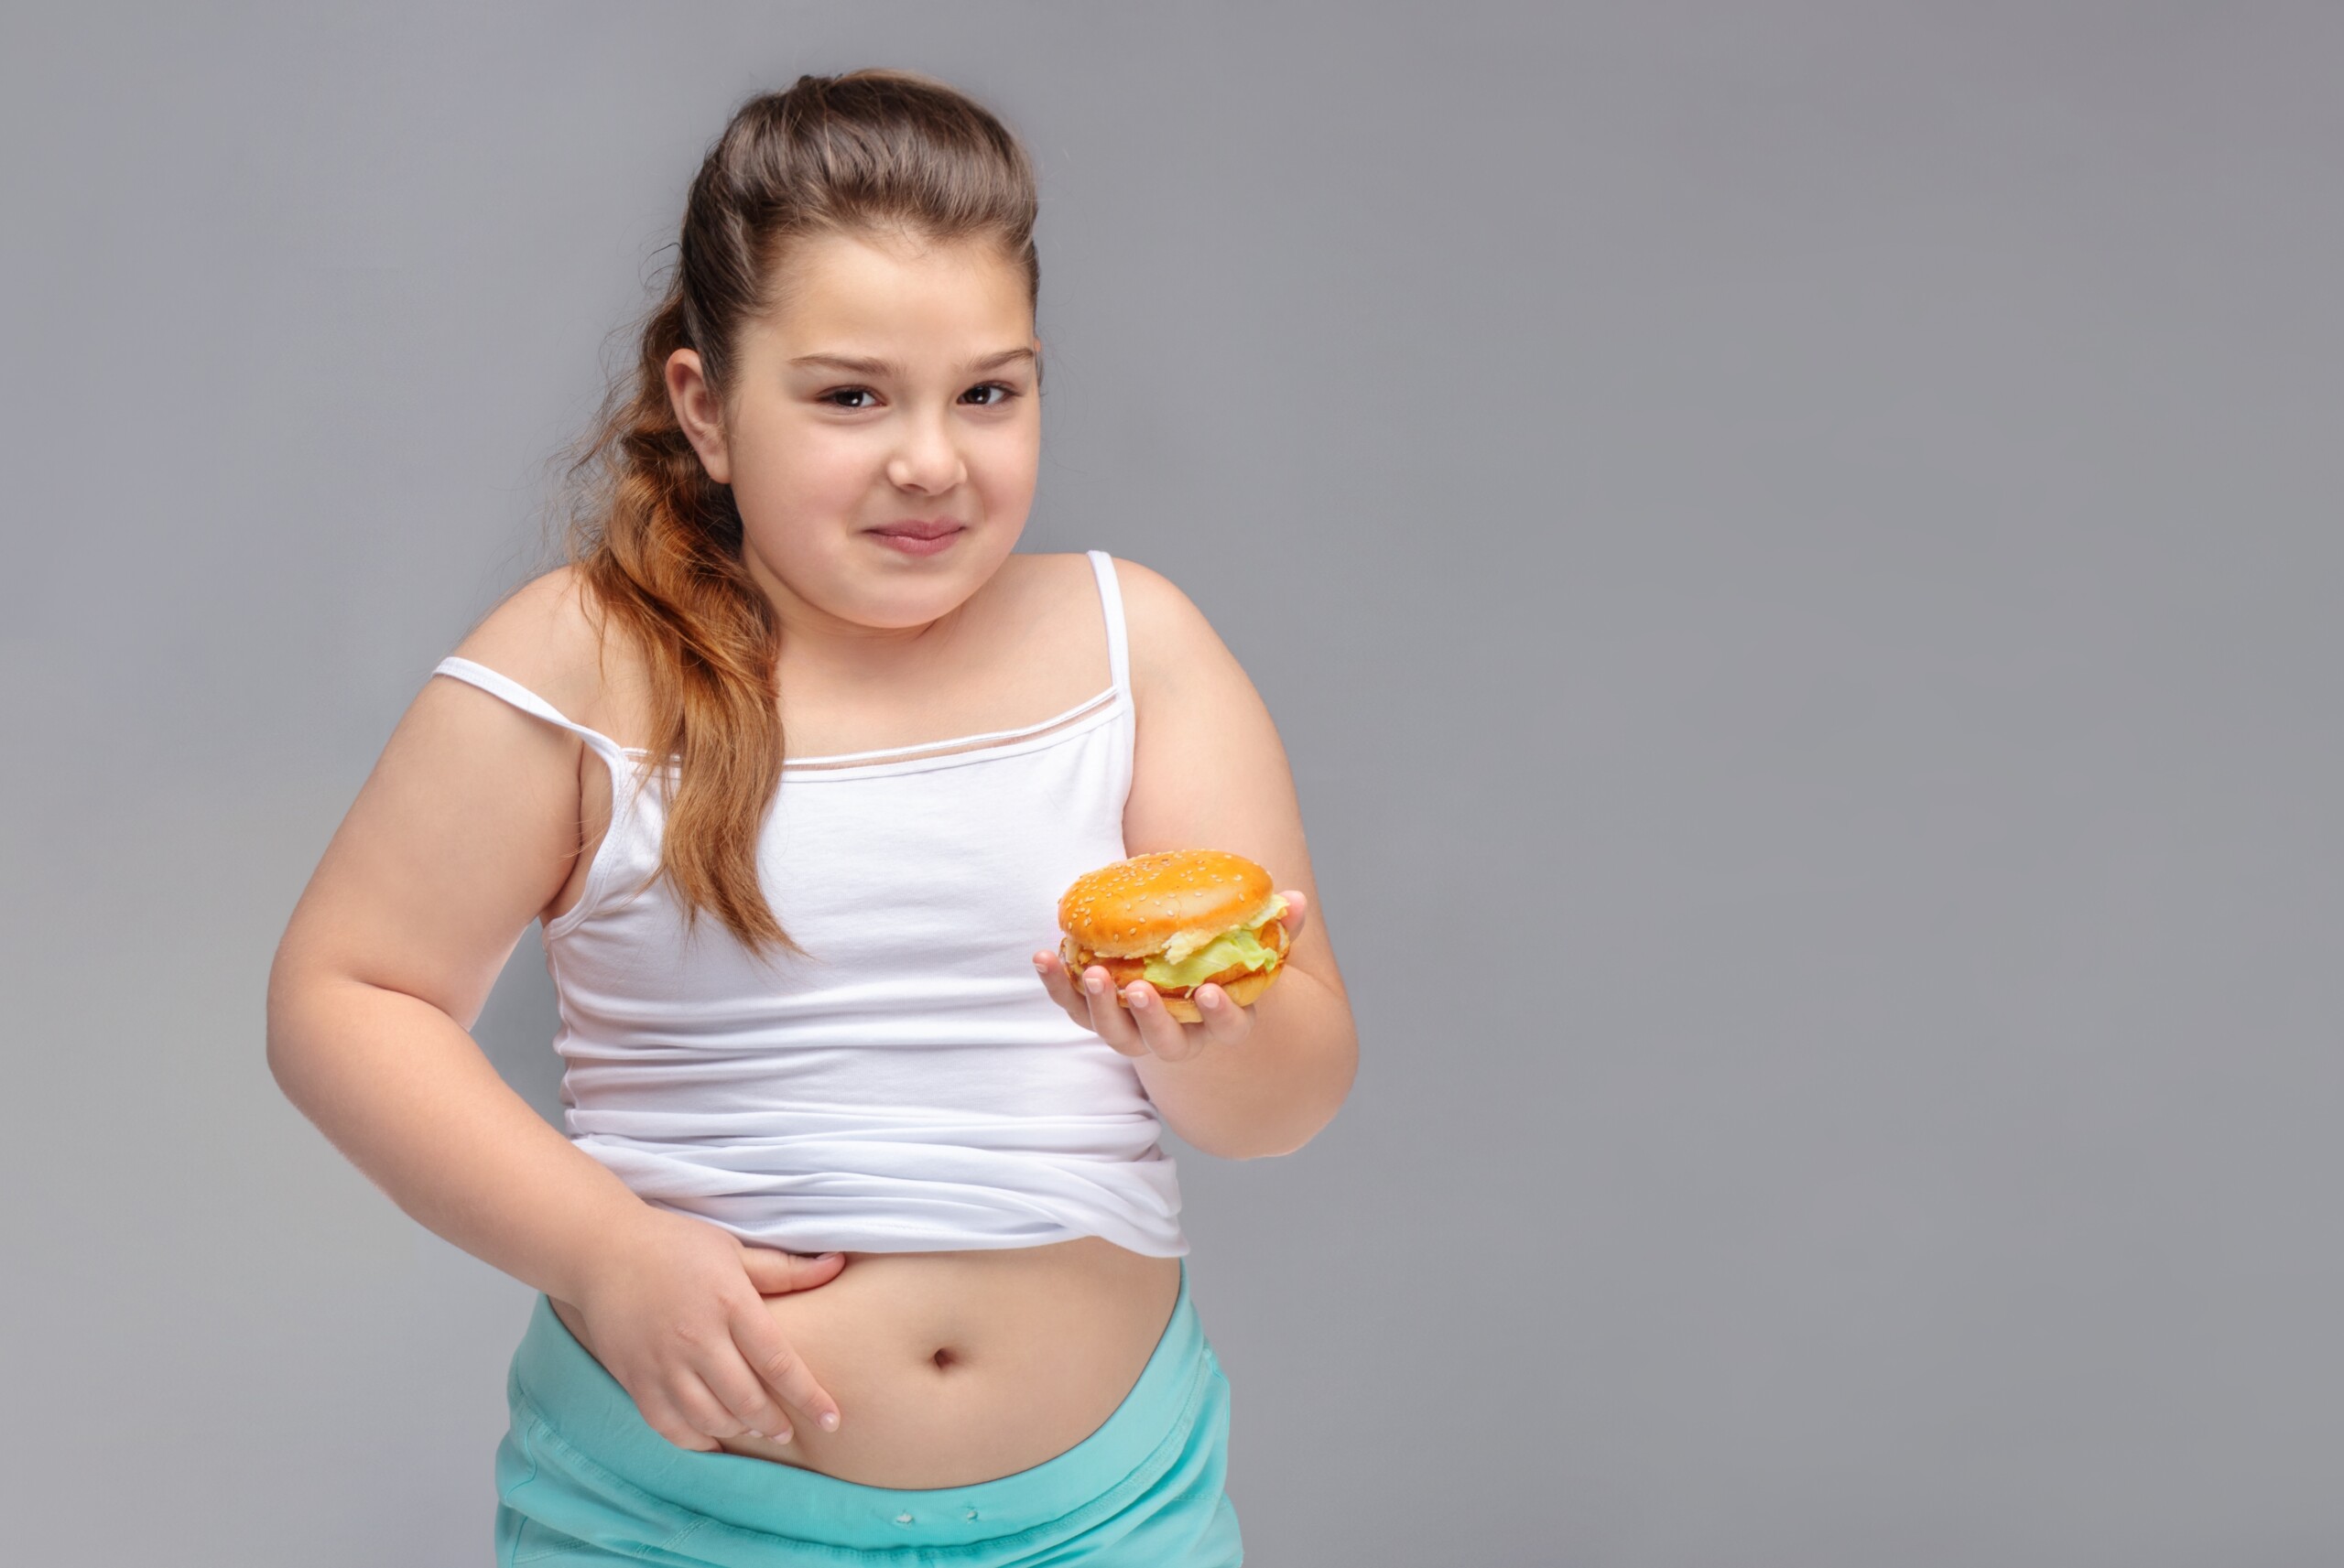 Plus Size Mom Teaches Obese Child to “Booo!” Diet Commercials